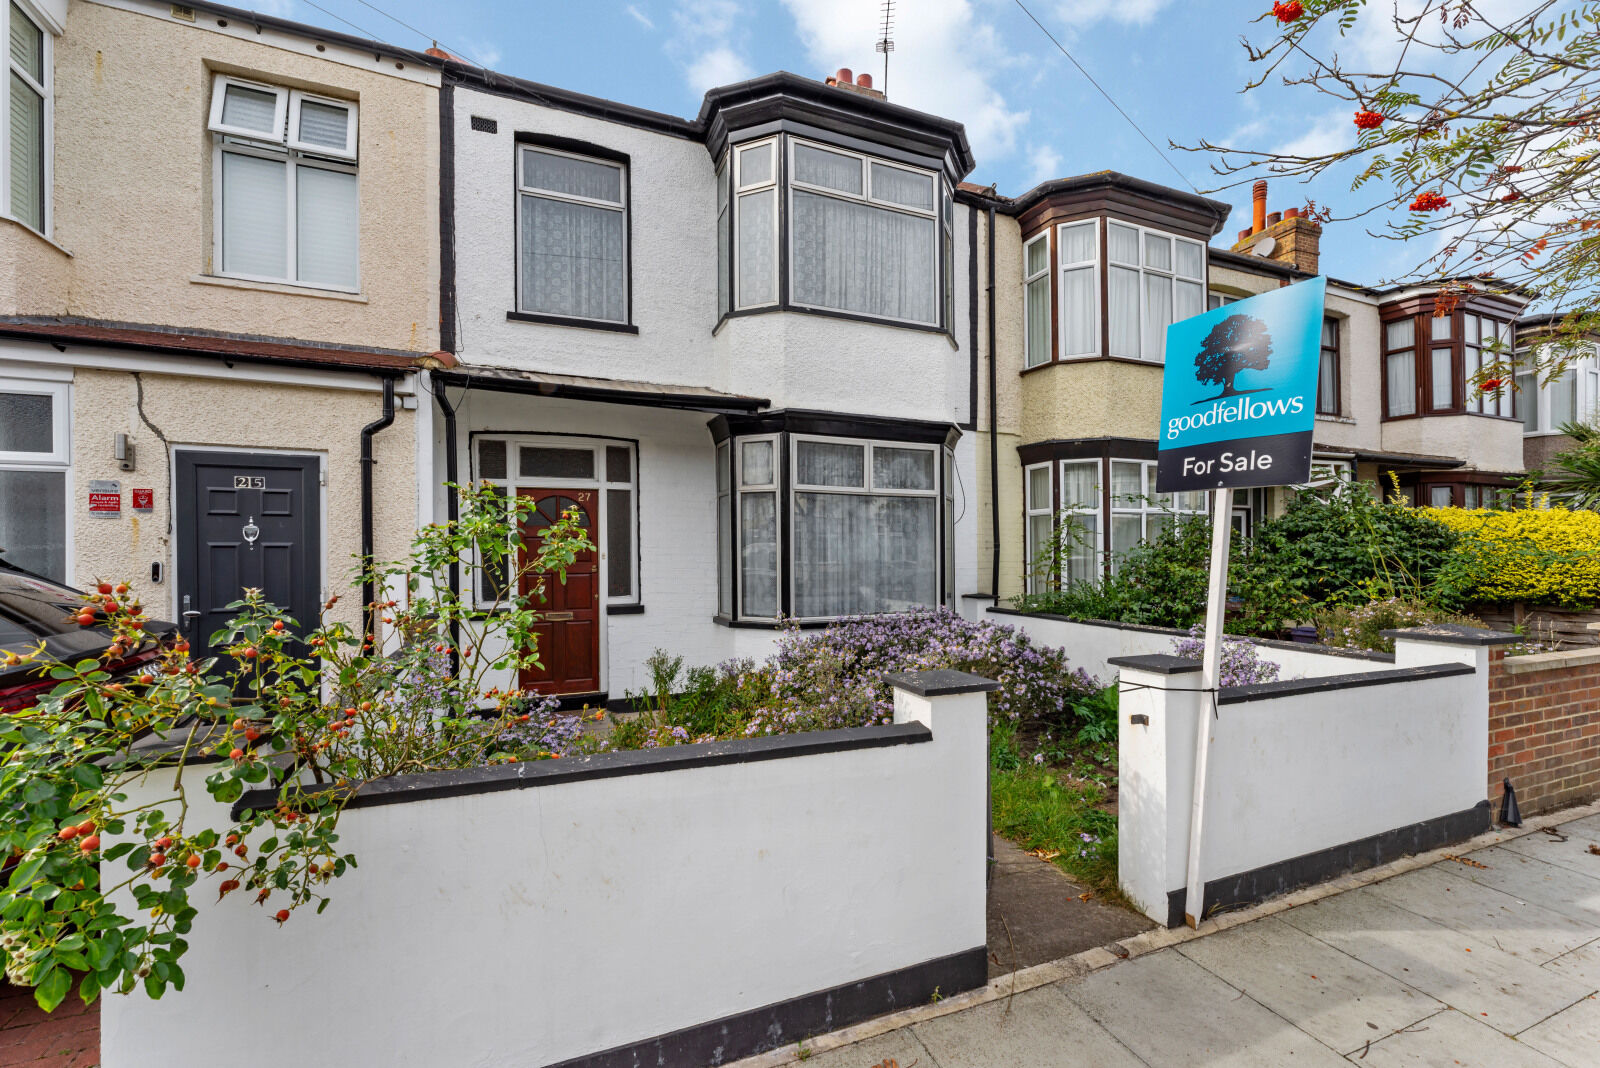 3 bedroom mid terraced house for sale Framfield Road, Mitcham, CR4, main image